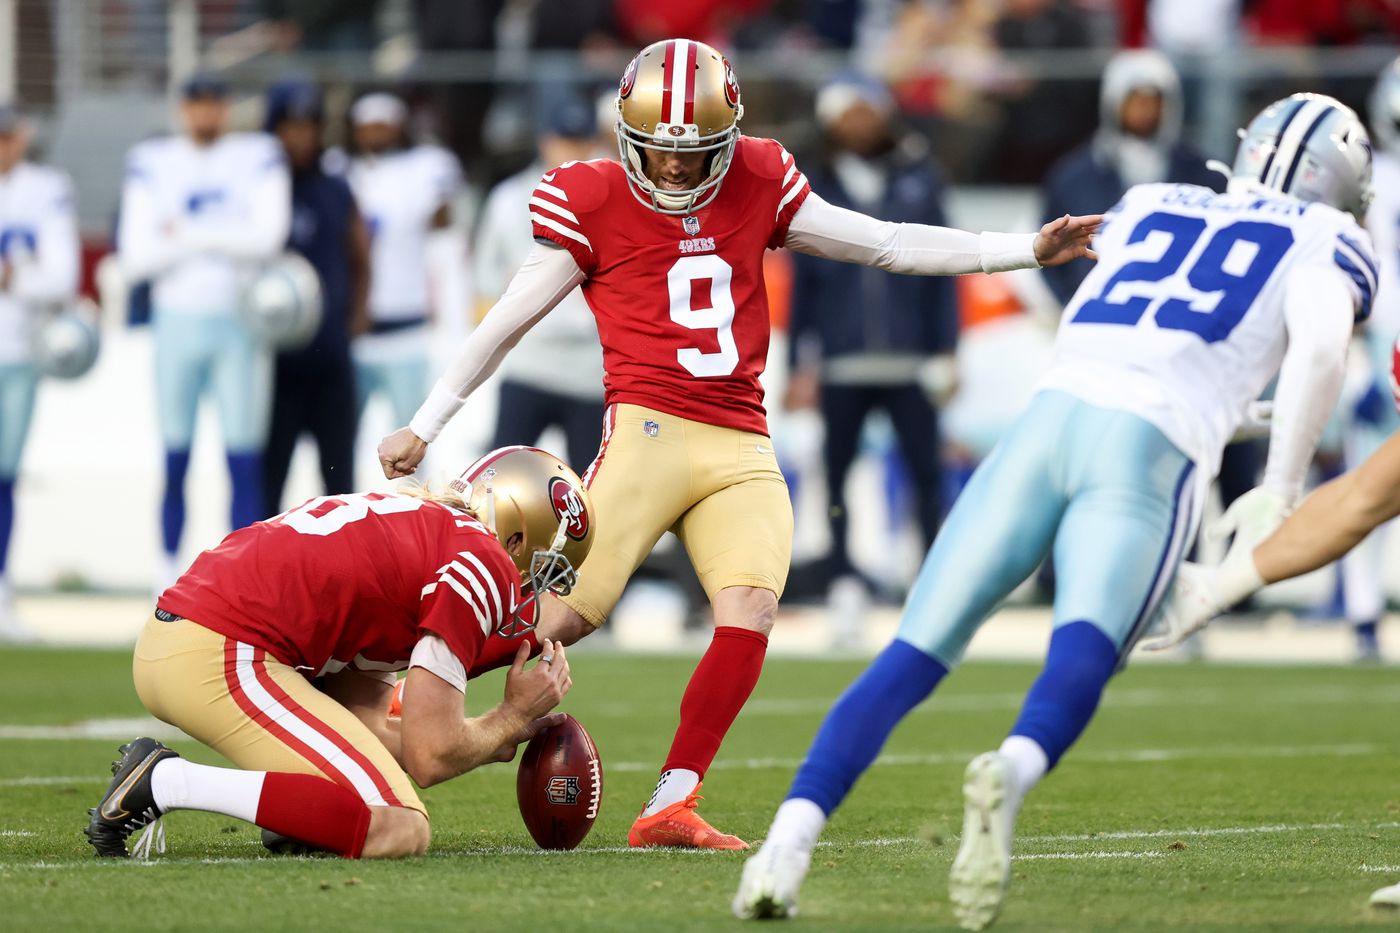 If the Cowboys make a change at kicker, they should pursue San Francisco’s Robbie Gould